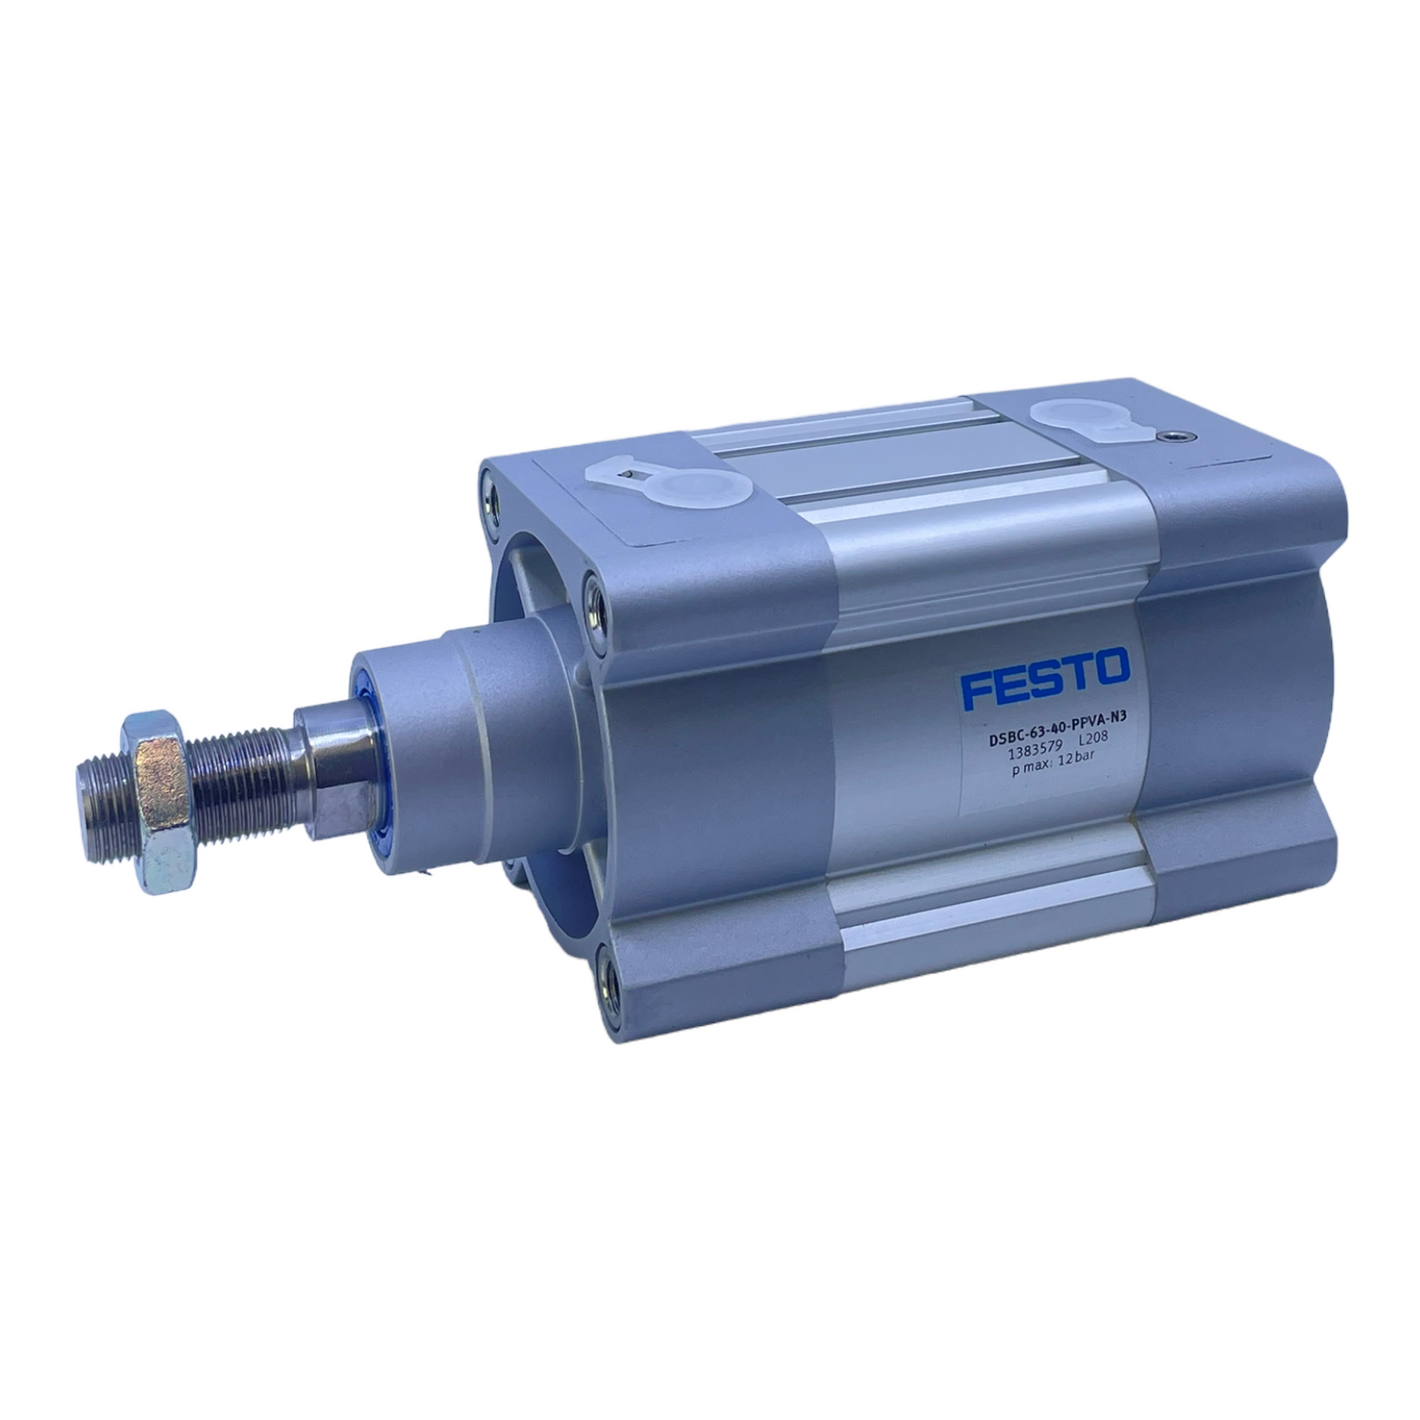 Festo DSBC-63-40-PPVA-N3 standard cylinder 1383579 0.4 to 12 bar double-acting